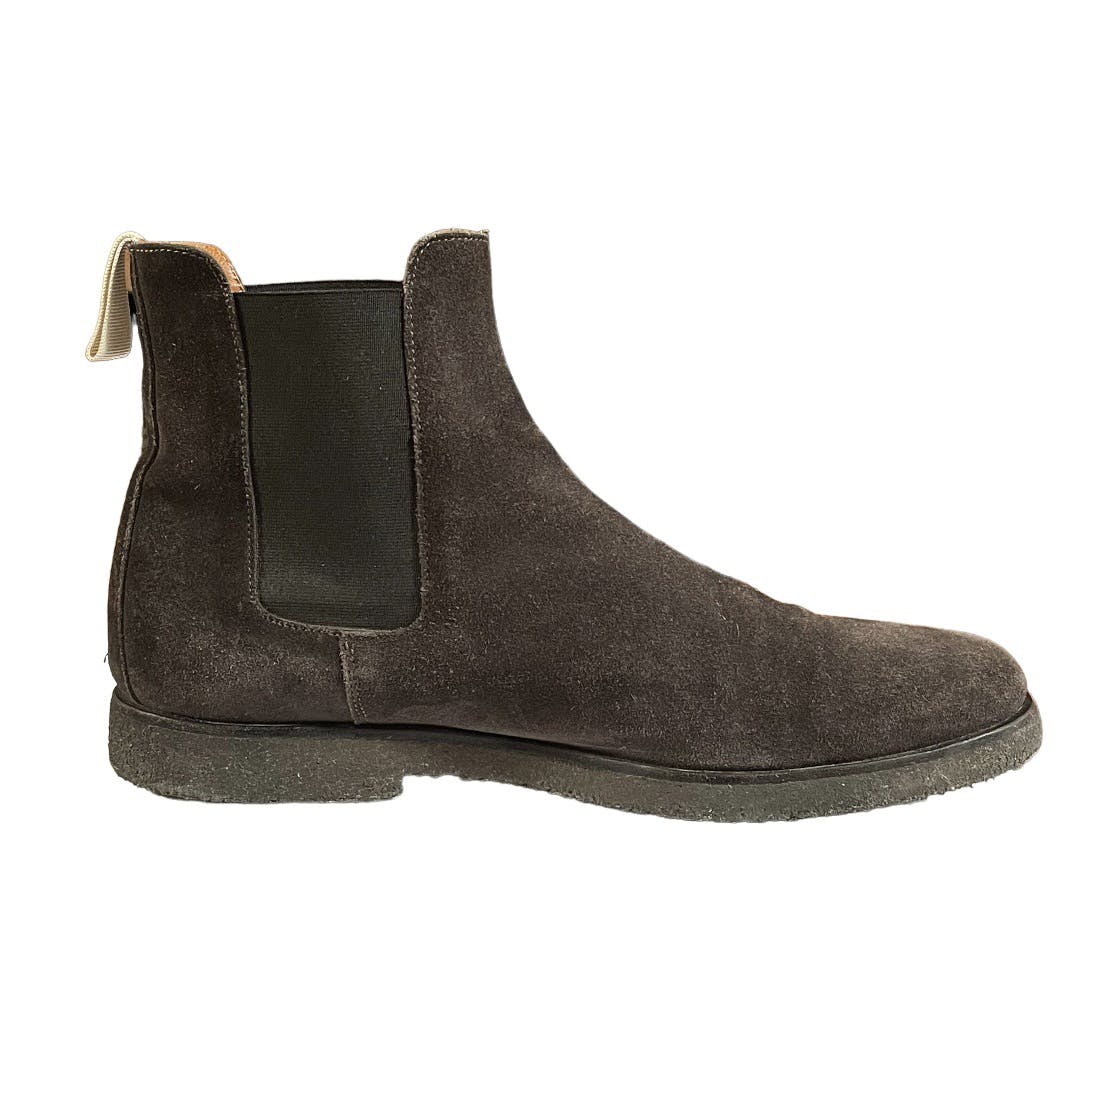 Suede Ankle Chelsea Boots - 6